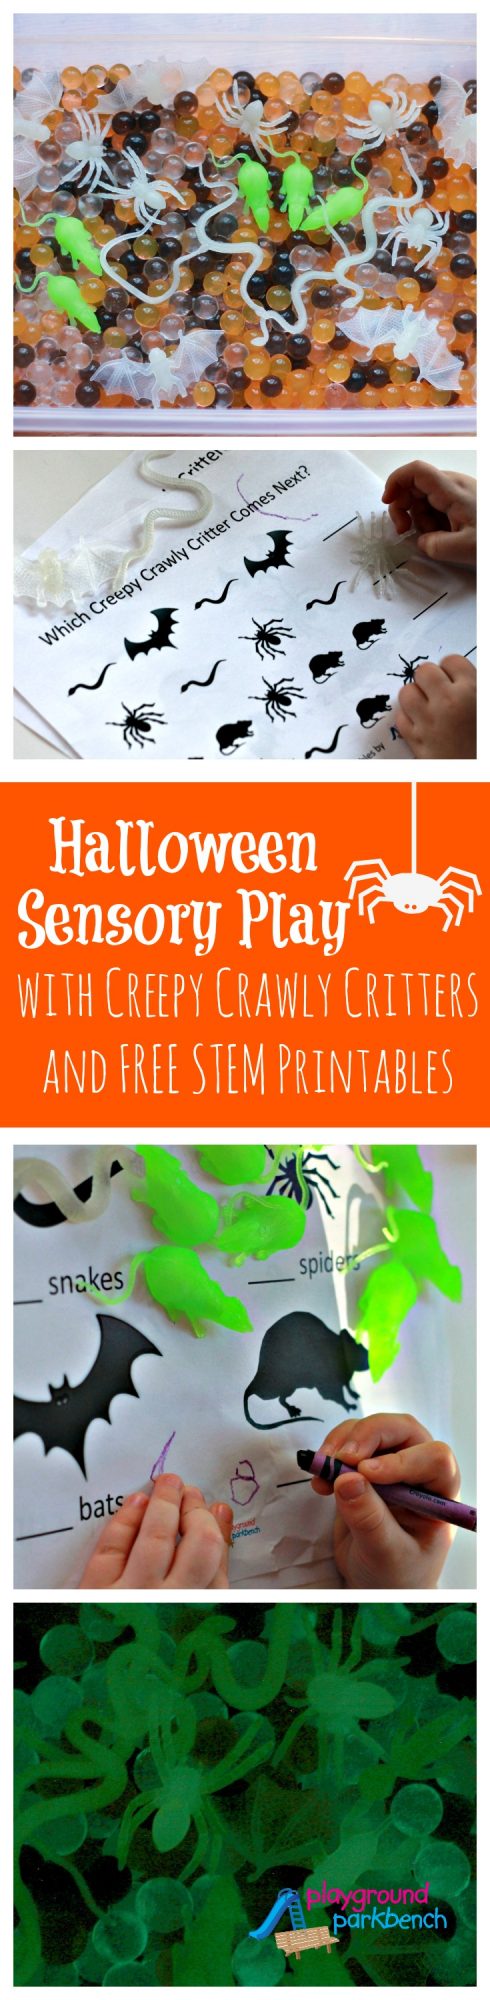 Halloween Sensory Play with Creepy Critters and FREE STEM Printables